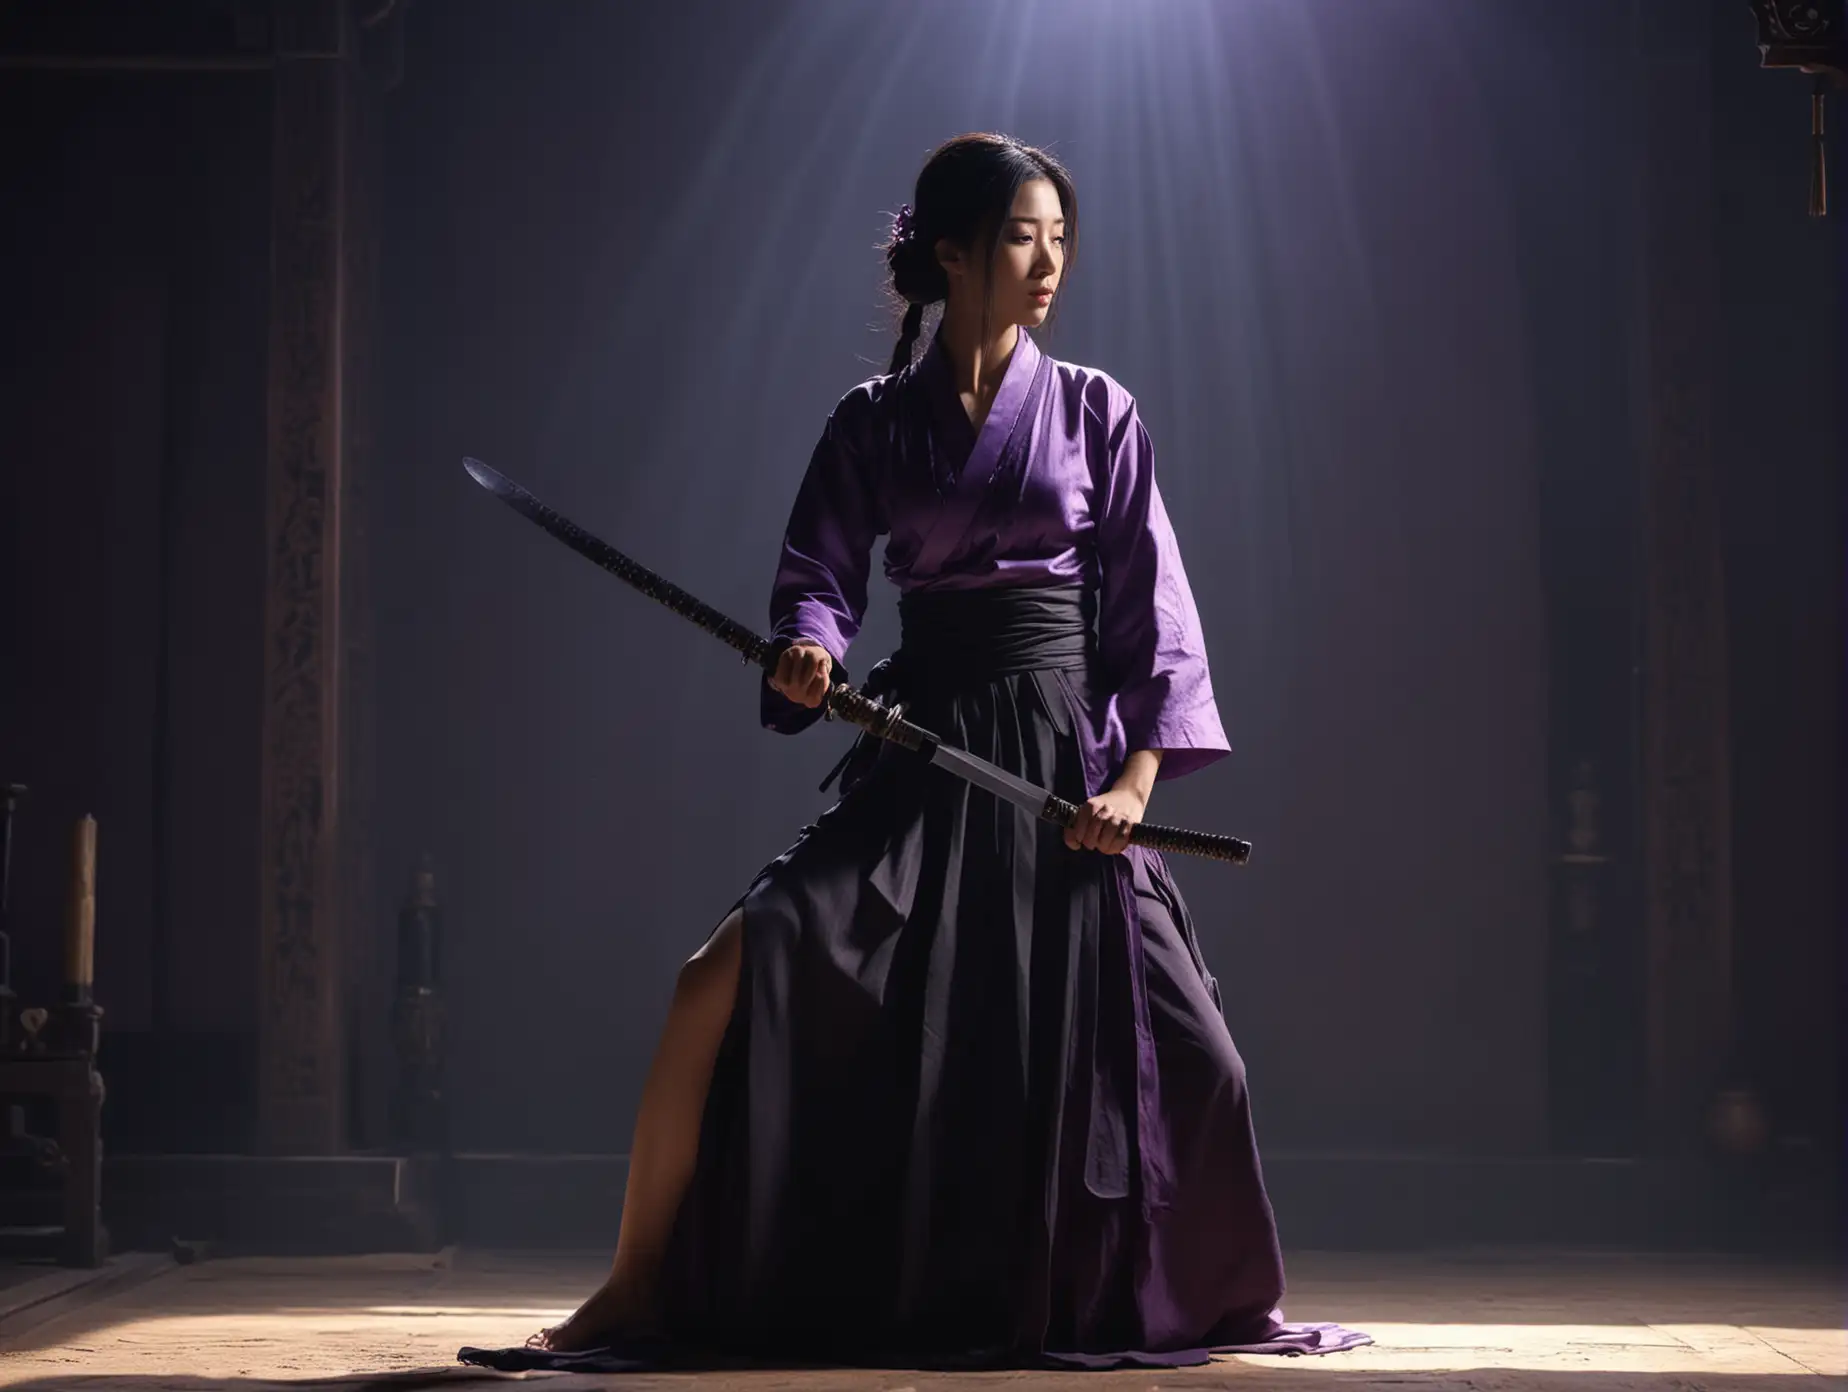 Mysterious-Oriental-Woman-Wielding-Tang-Sword-in-Ancient-Architectural-Setting